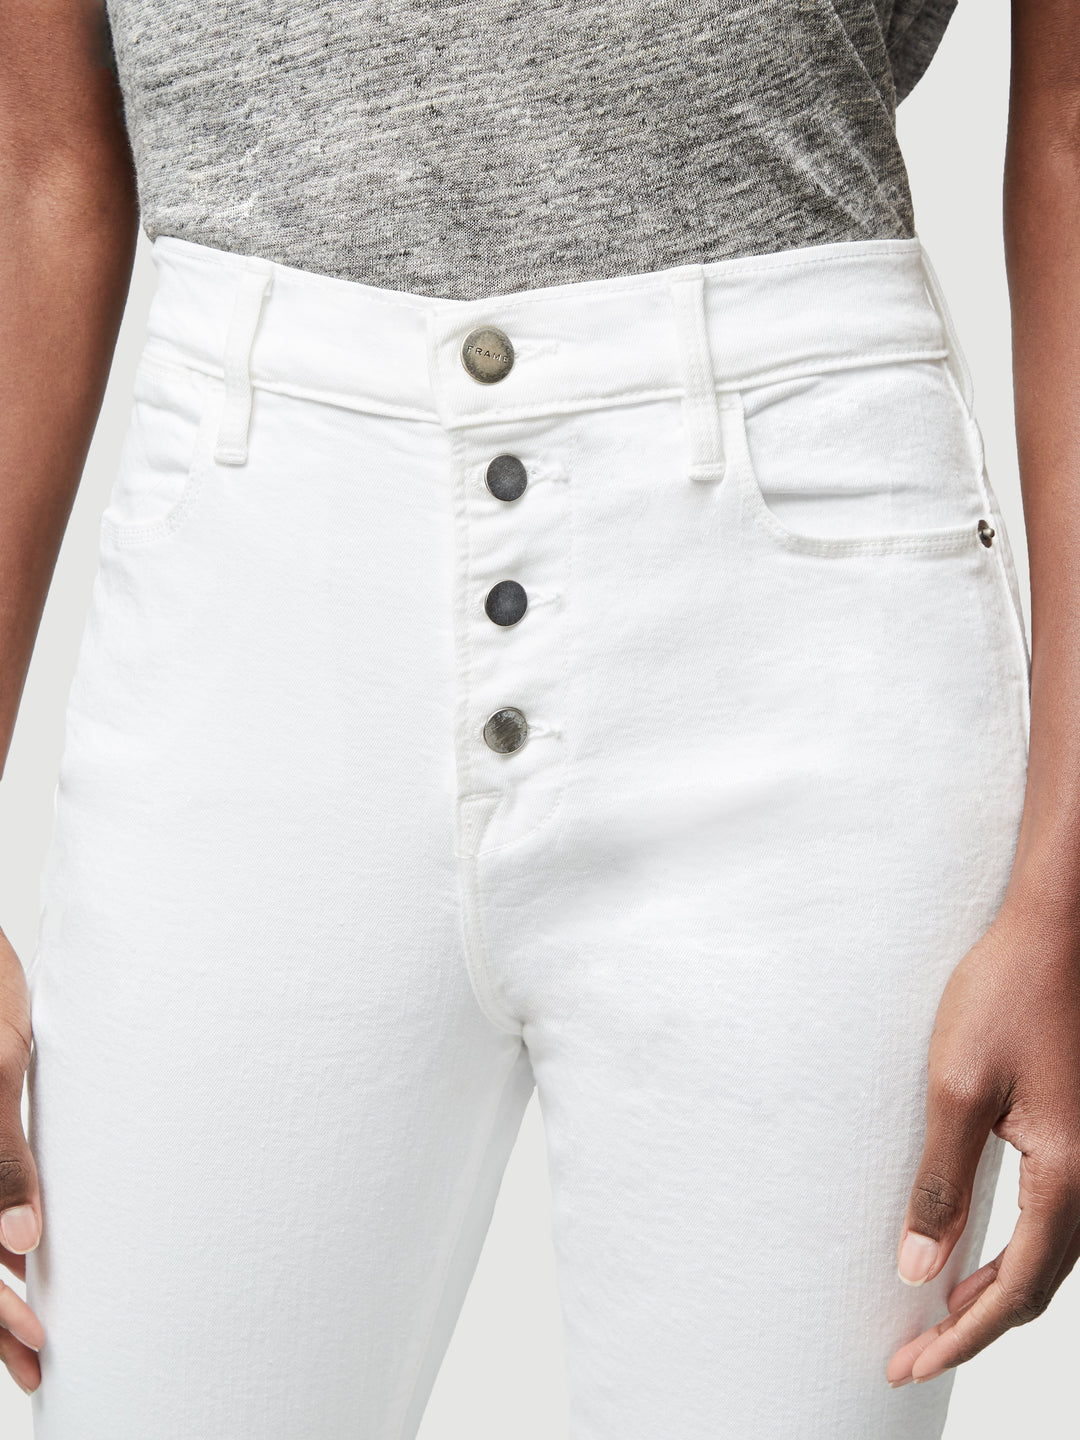 Frame - Le High Skinny Button Fly Blanc Street